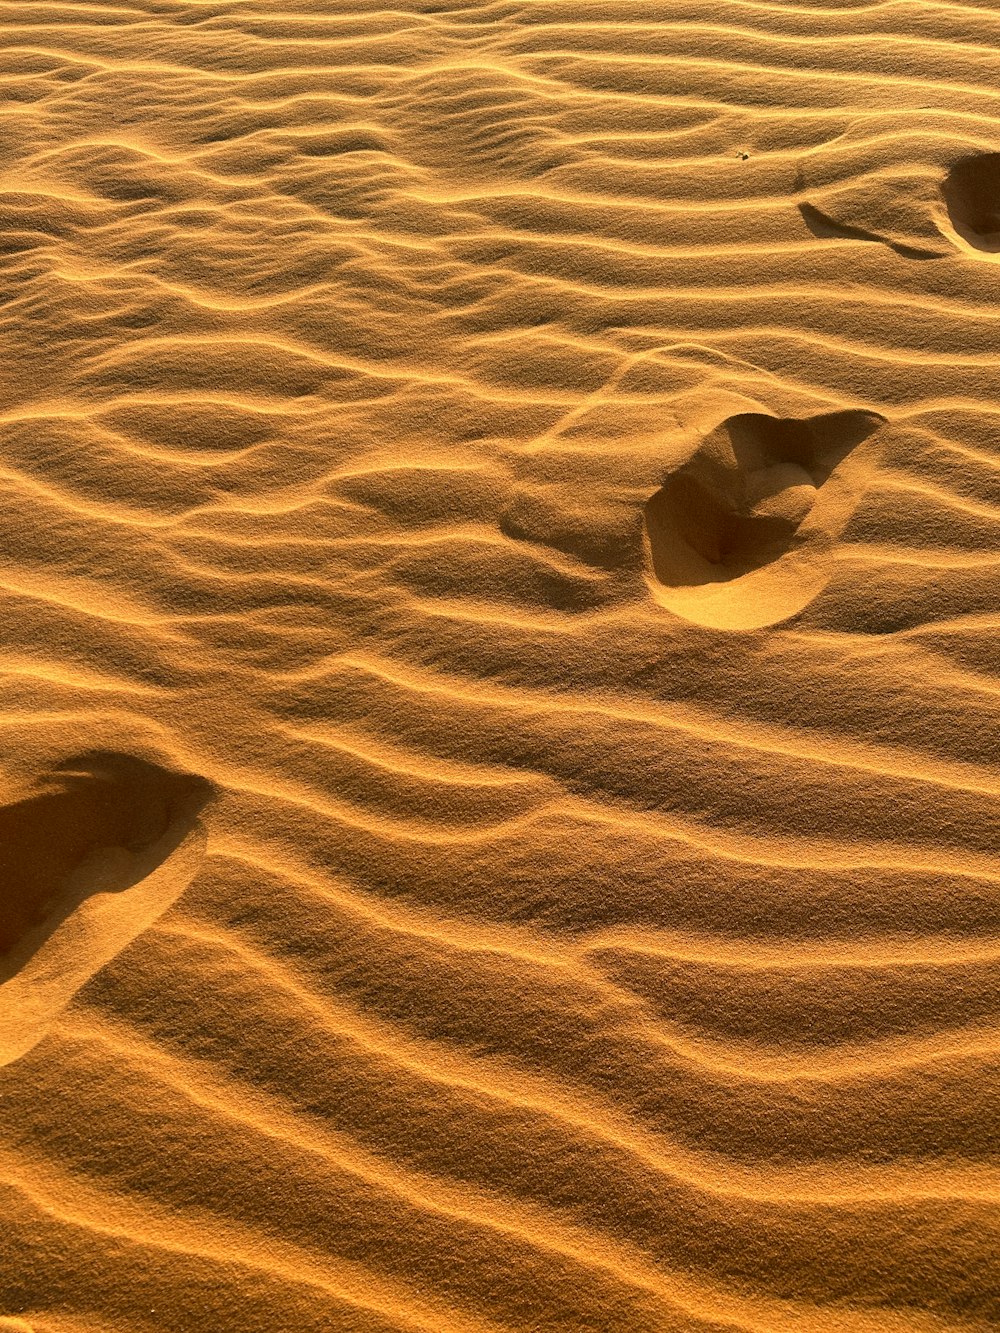 two footprints in the sand of a desert